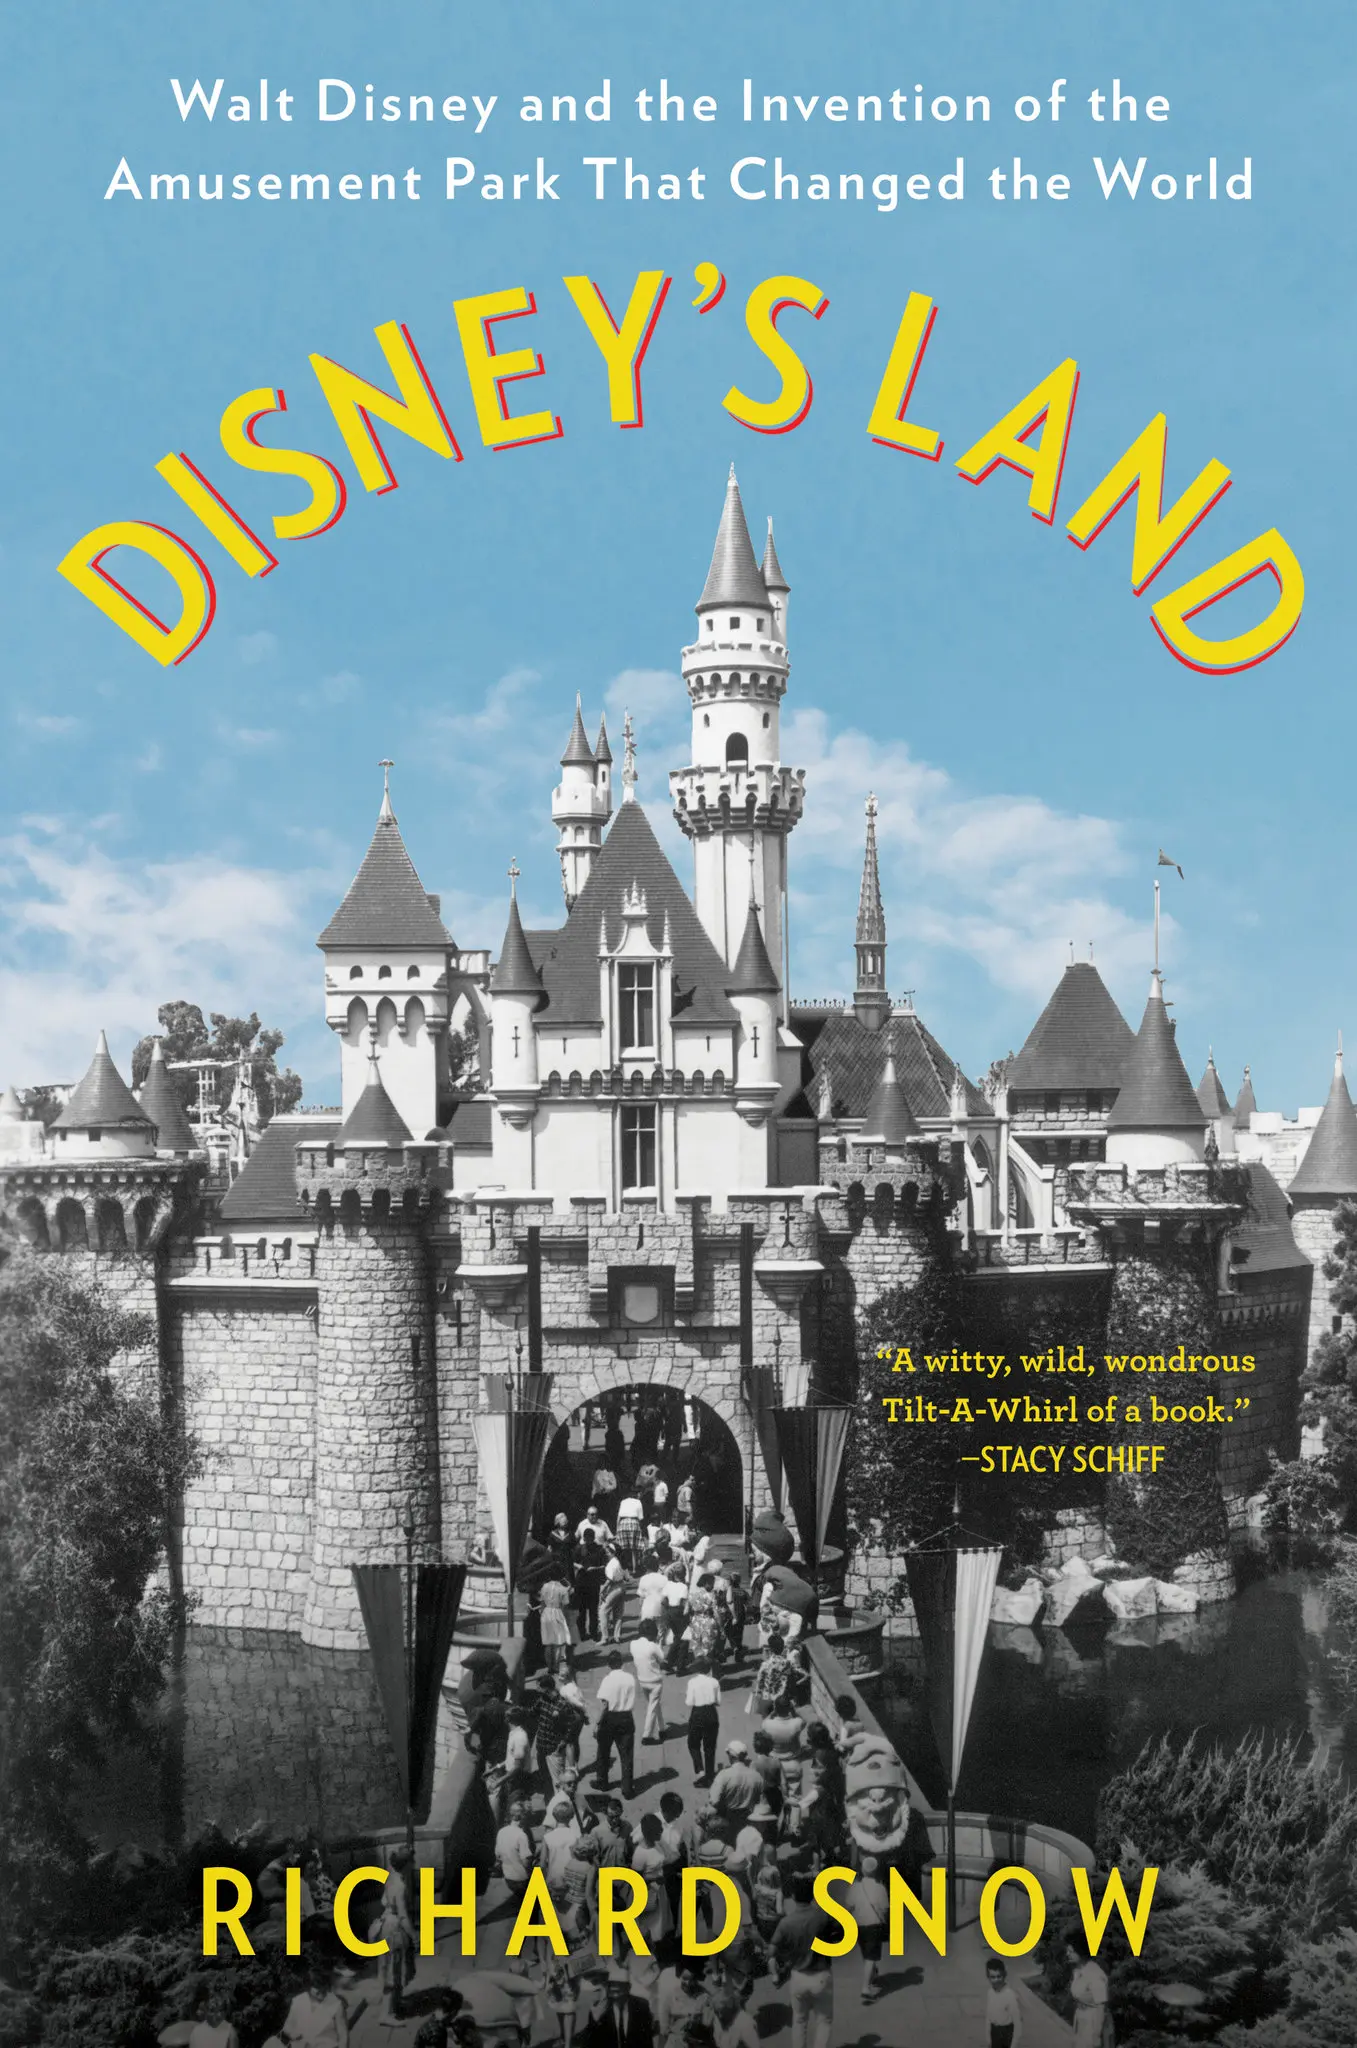 Disney’s Land by Richard Snow, part 1: A supportive history